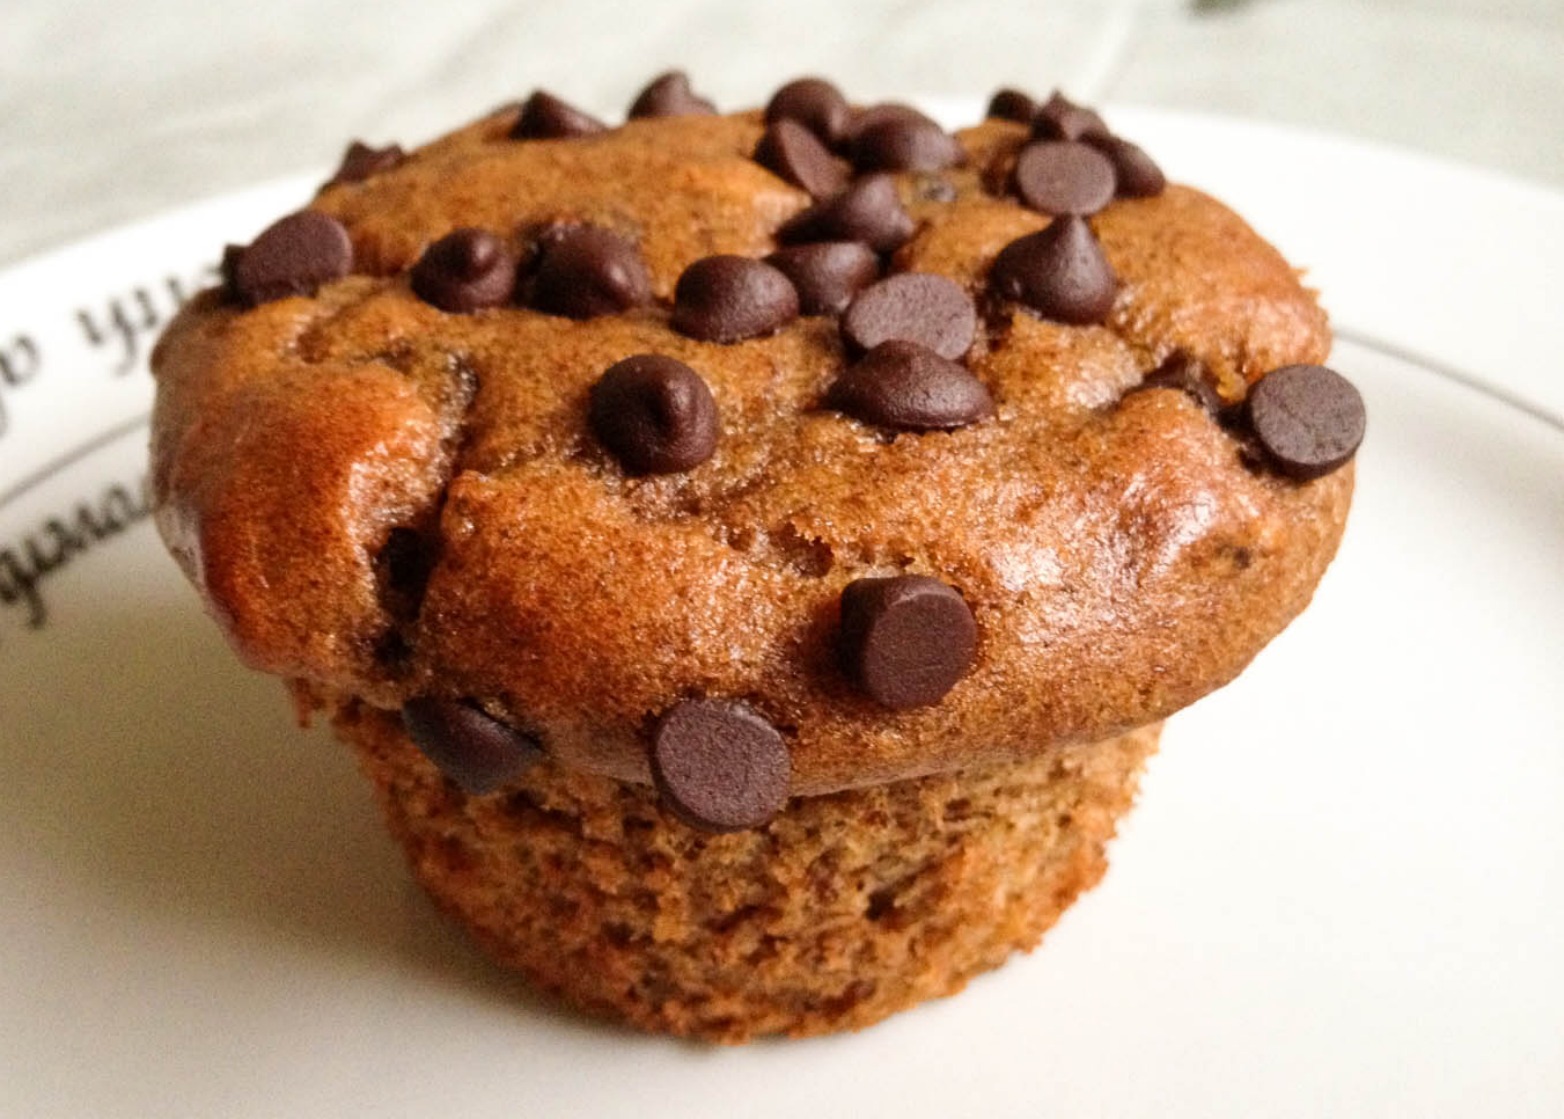 How to Tweak a Muffin Recipe to Make Extra Large Muffins - Delishably